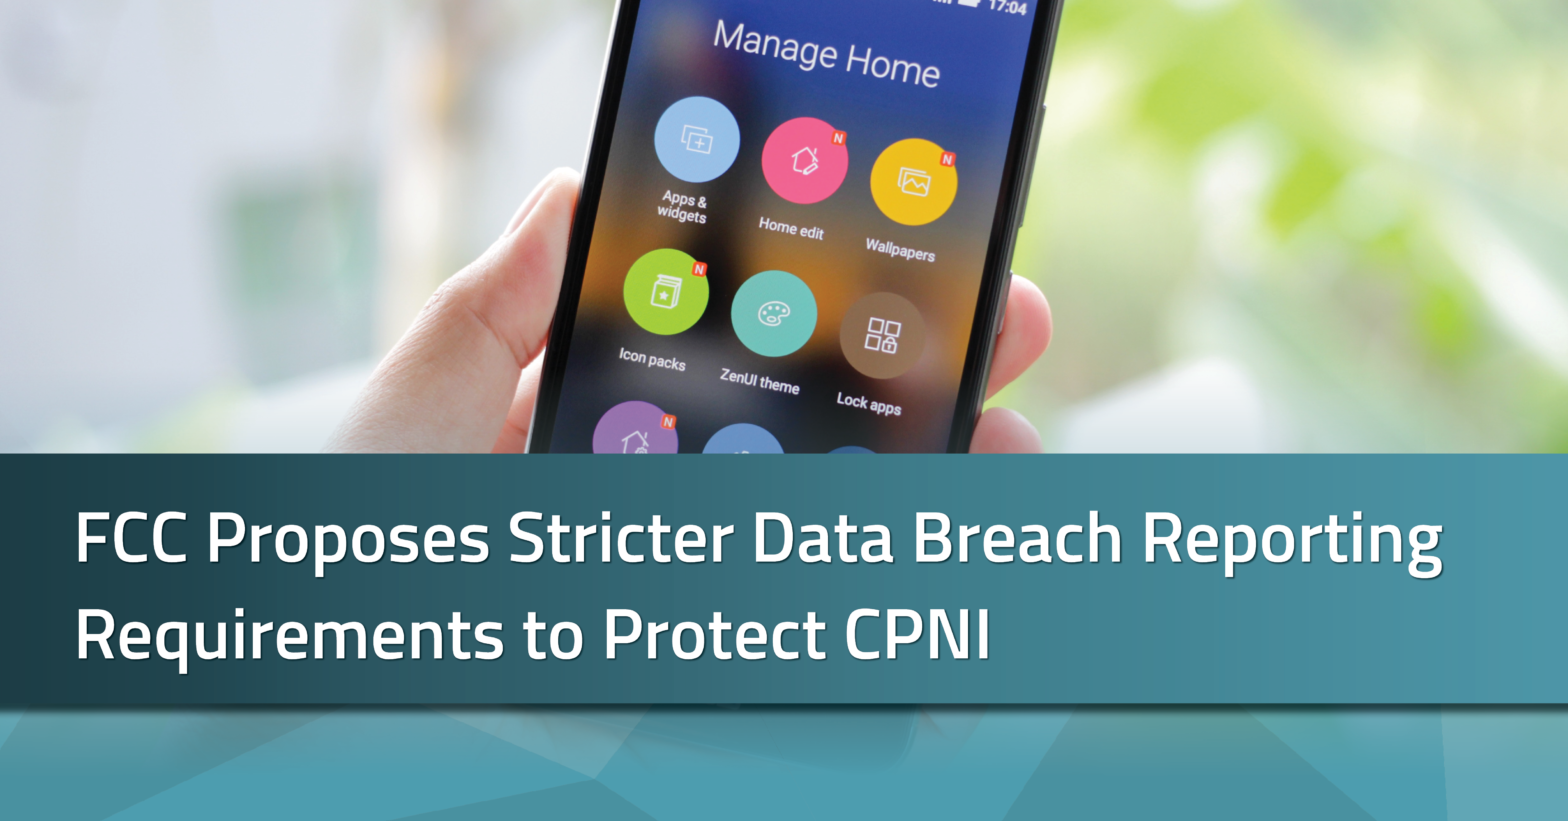 fcc proposes stricter data breach reporting requirements to protect cpni | radarfirst